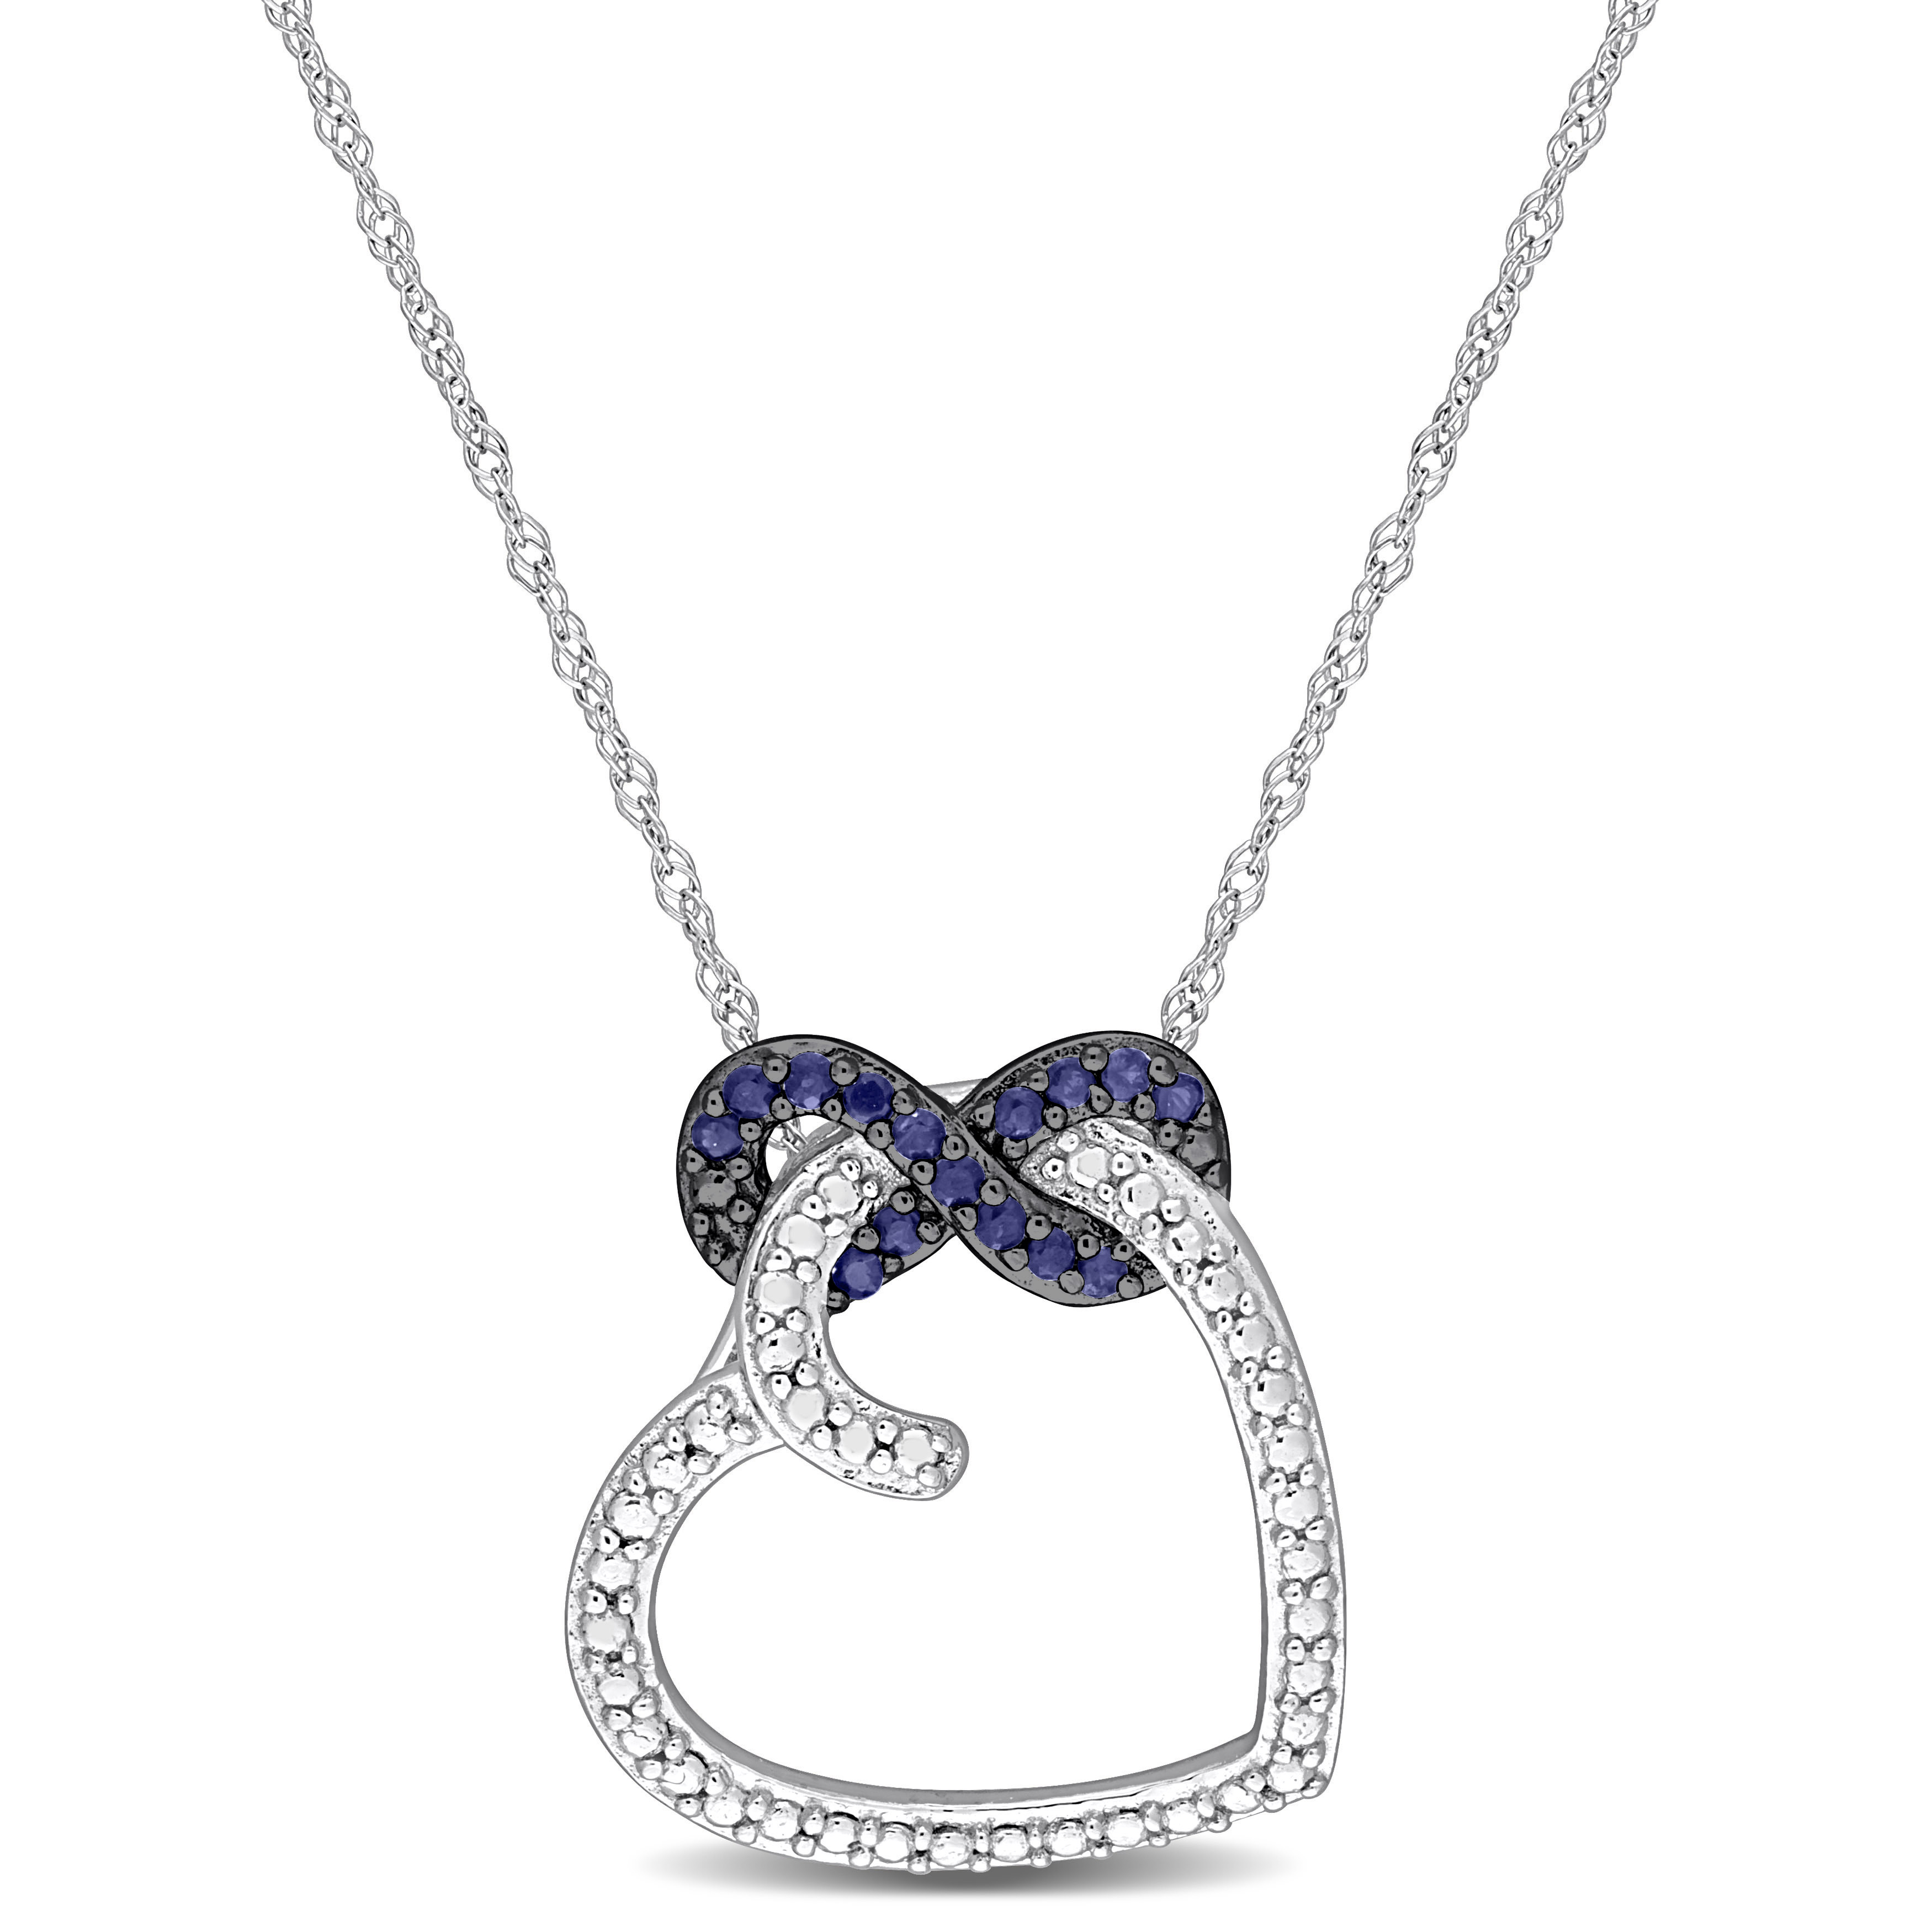 1/6 CT TGW Sapphire Infinity Heart Pendant with Chain in 10k White Gold - 17 in.